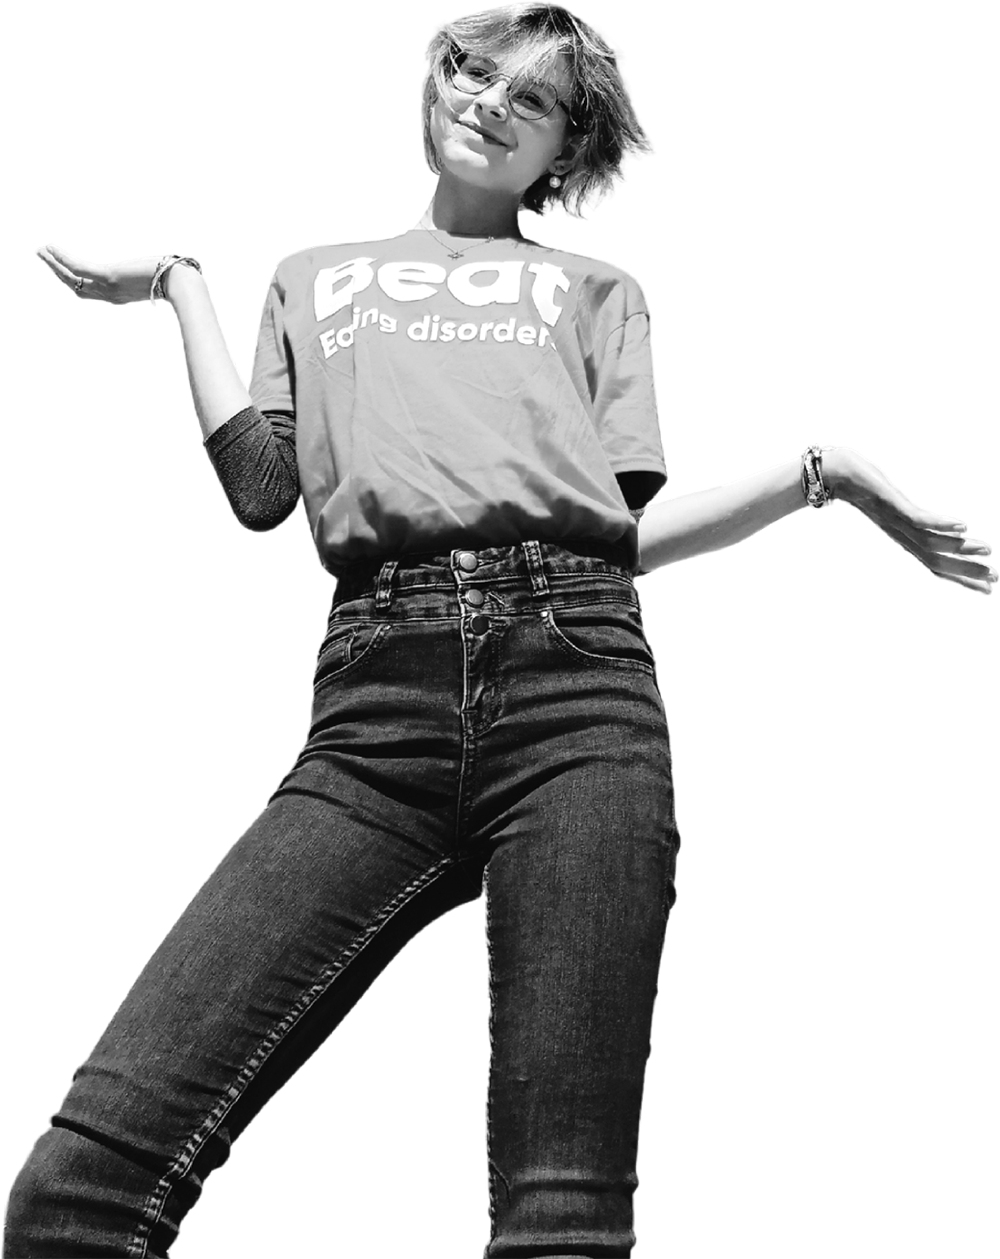 A young woman wearing a Beat Eating Disorders t-shirt.